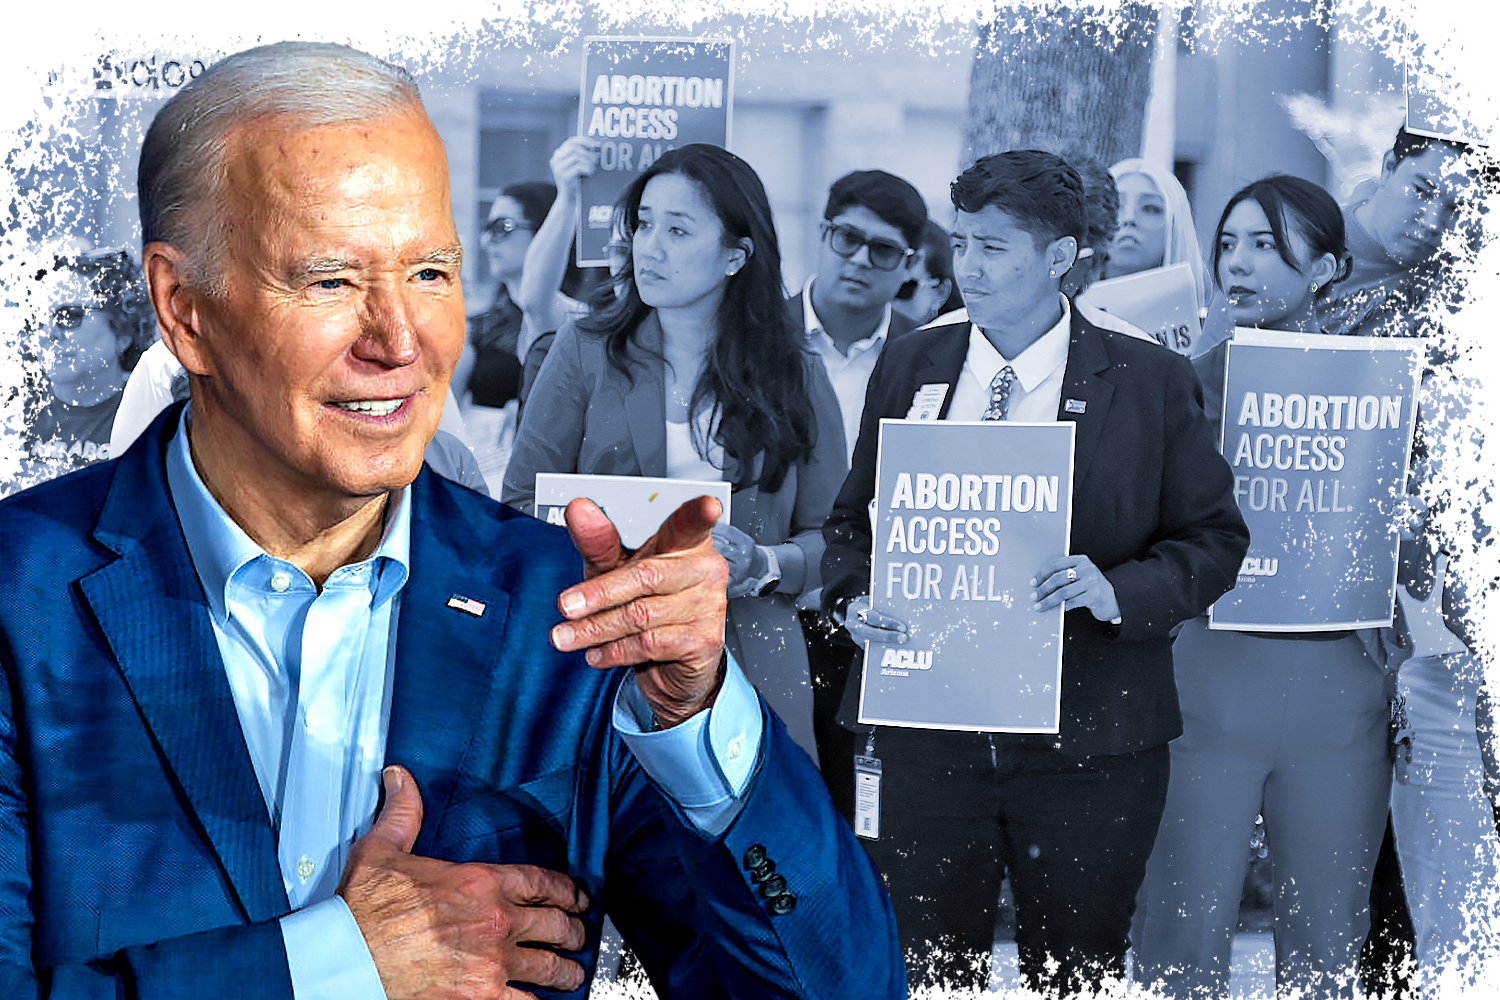 Arizona’s abortion laws are in disarray. Will Biden benefit?